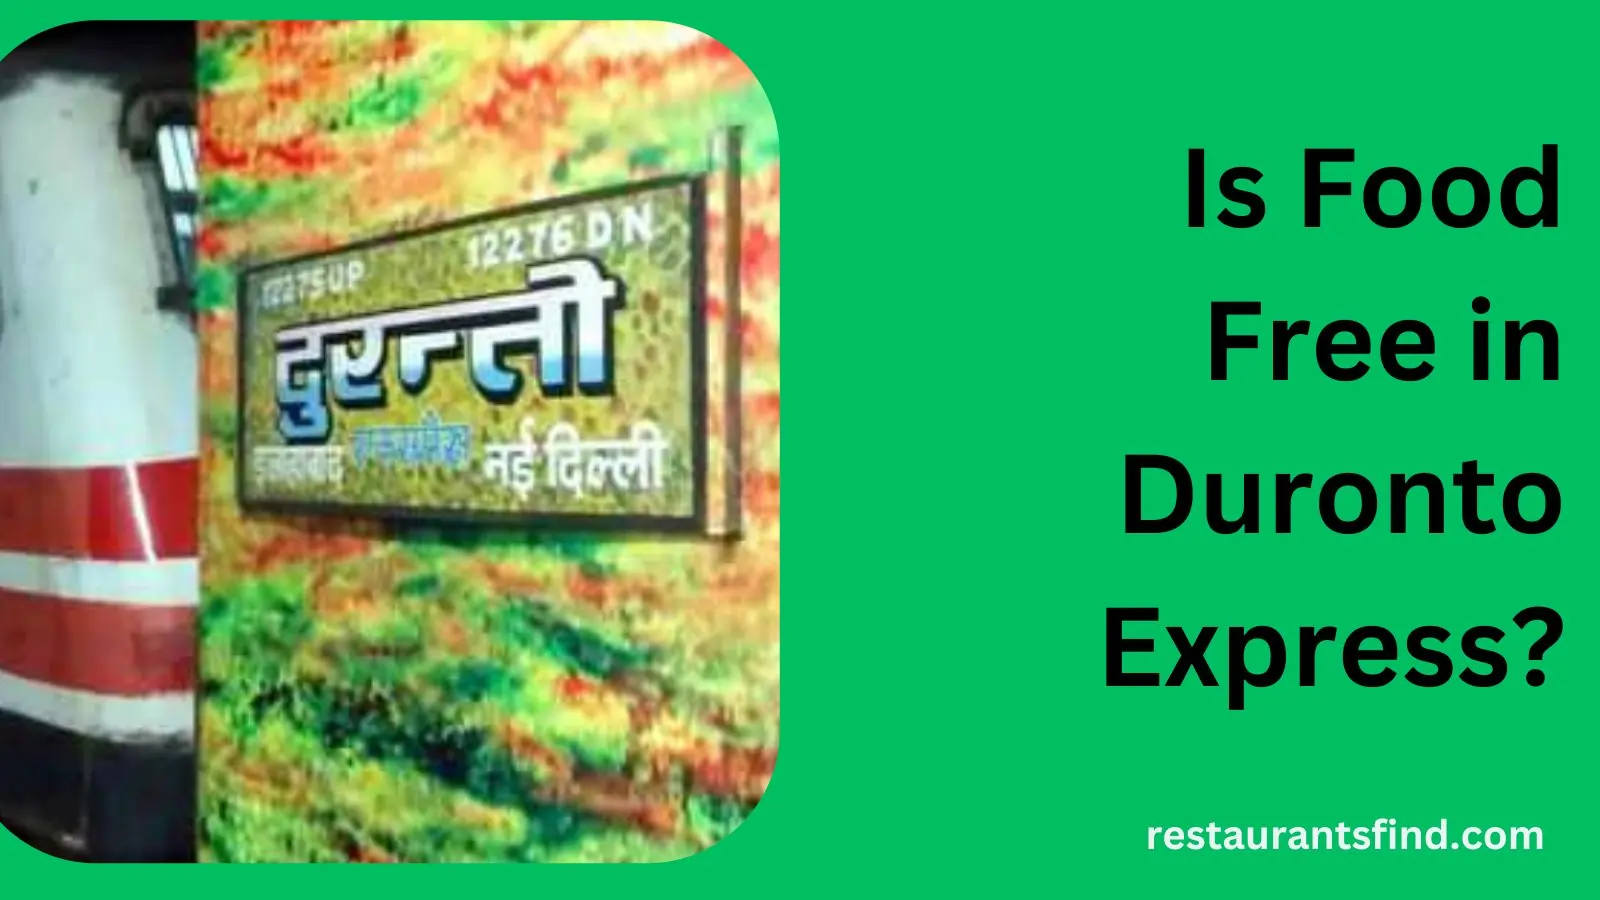 Is Food Free in Duronto Express?